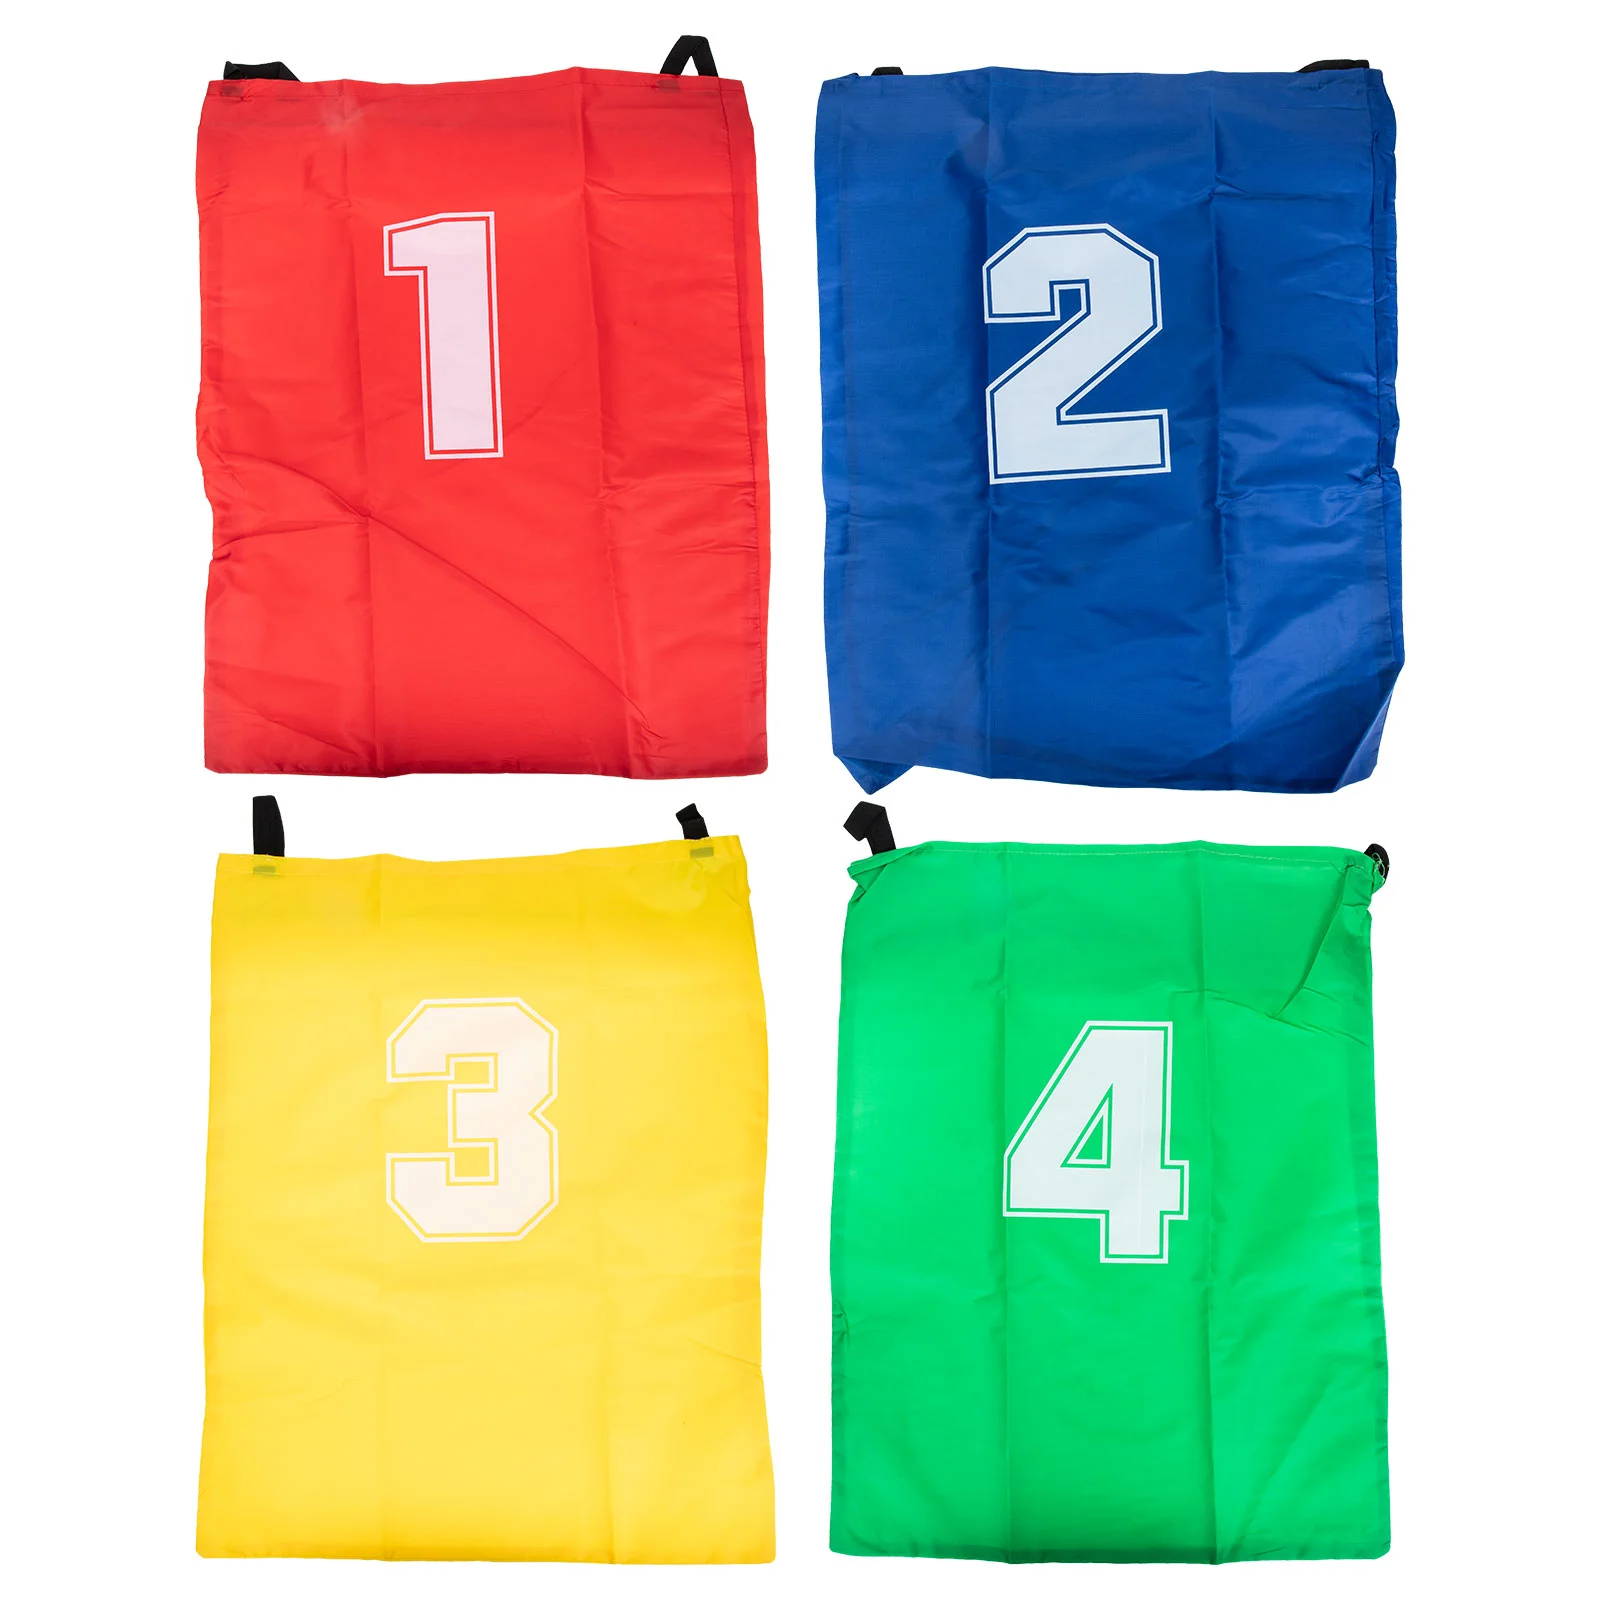 

4 Pcs Jumping Bag Interactive Game Prop Outdoor Party Sack Race Props Carnival Toy Canvas Sensory Training Child